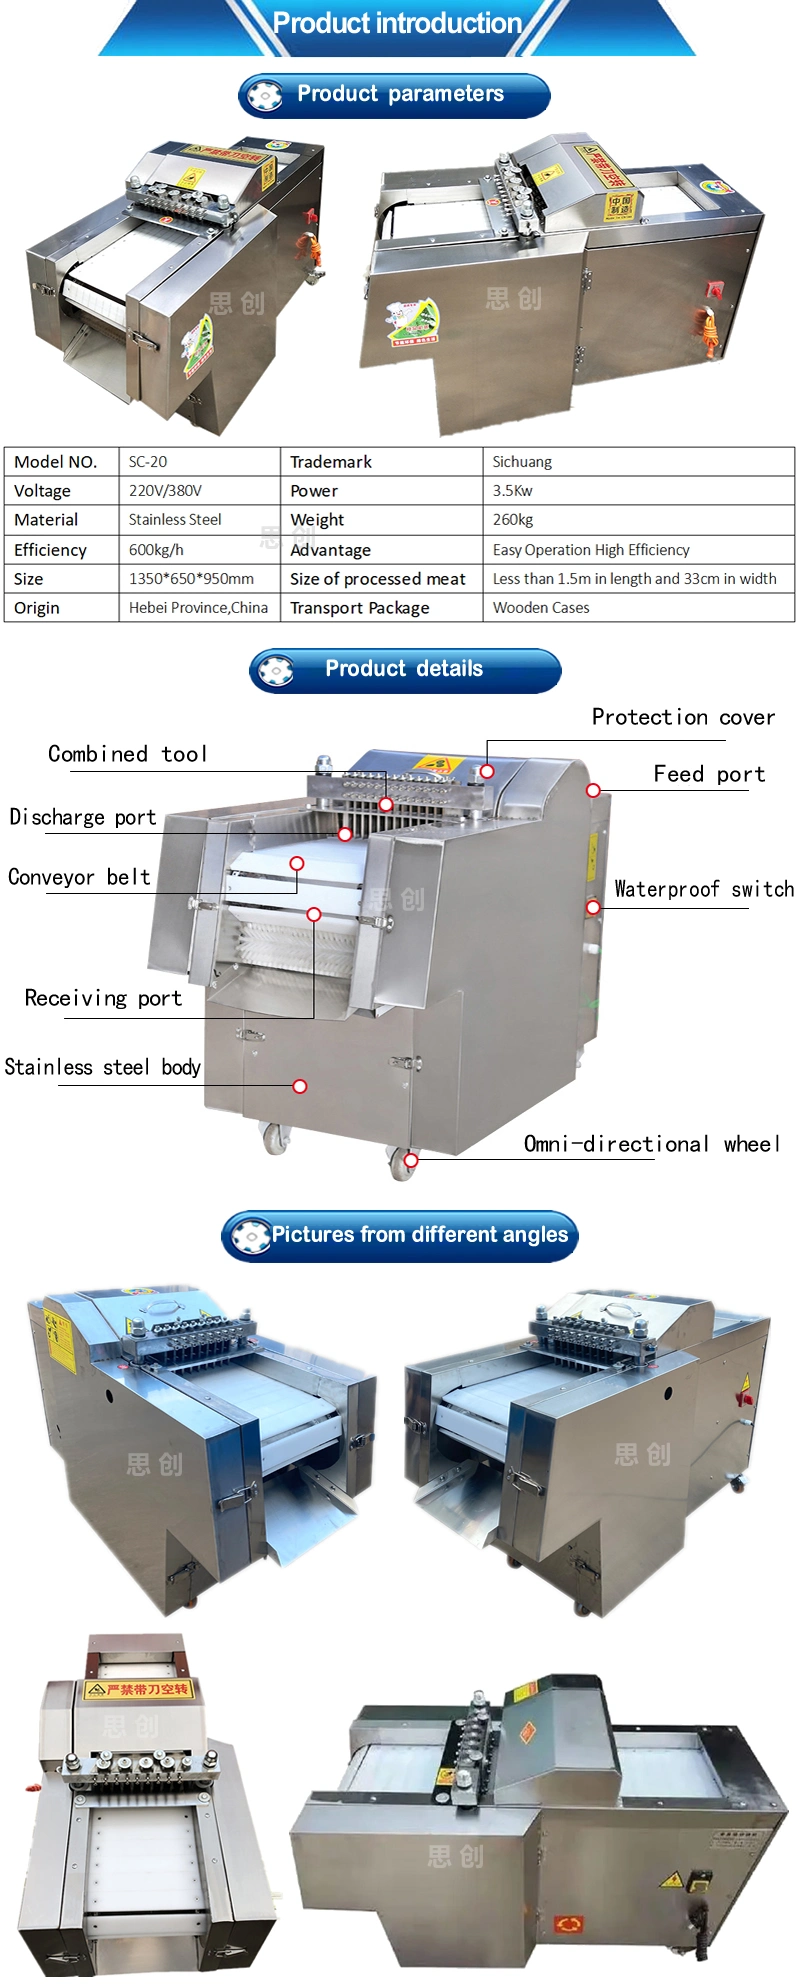 Automatic Chicken Fish Cutting Machine for Whole Chicken Block Cubes Cutter Frozen Fish Chopping